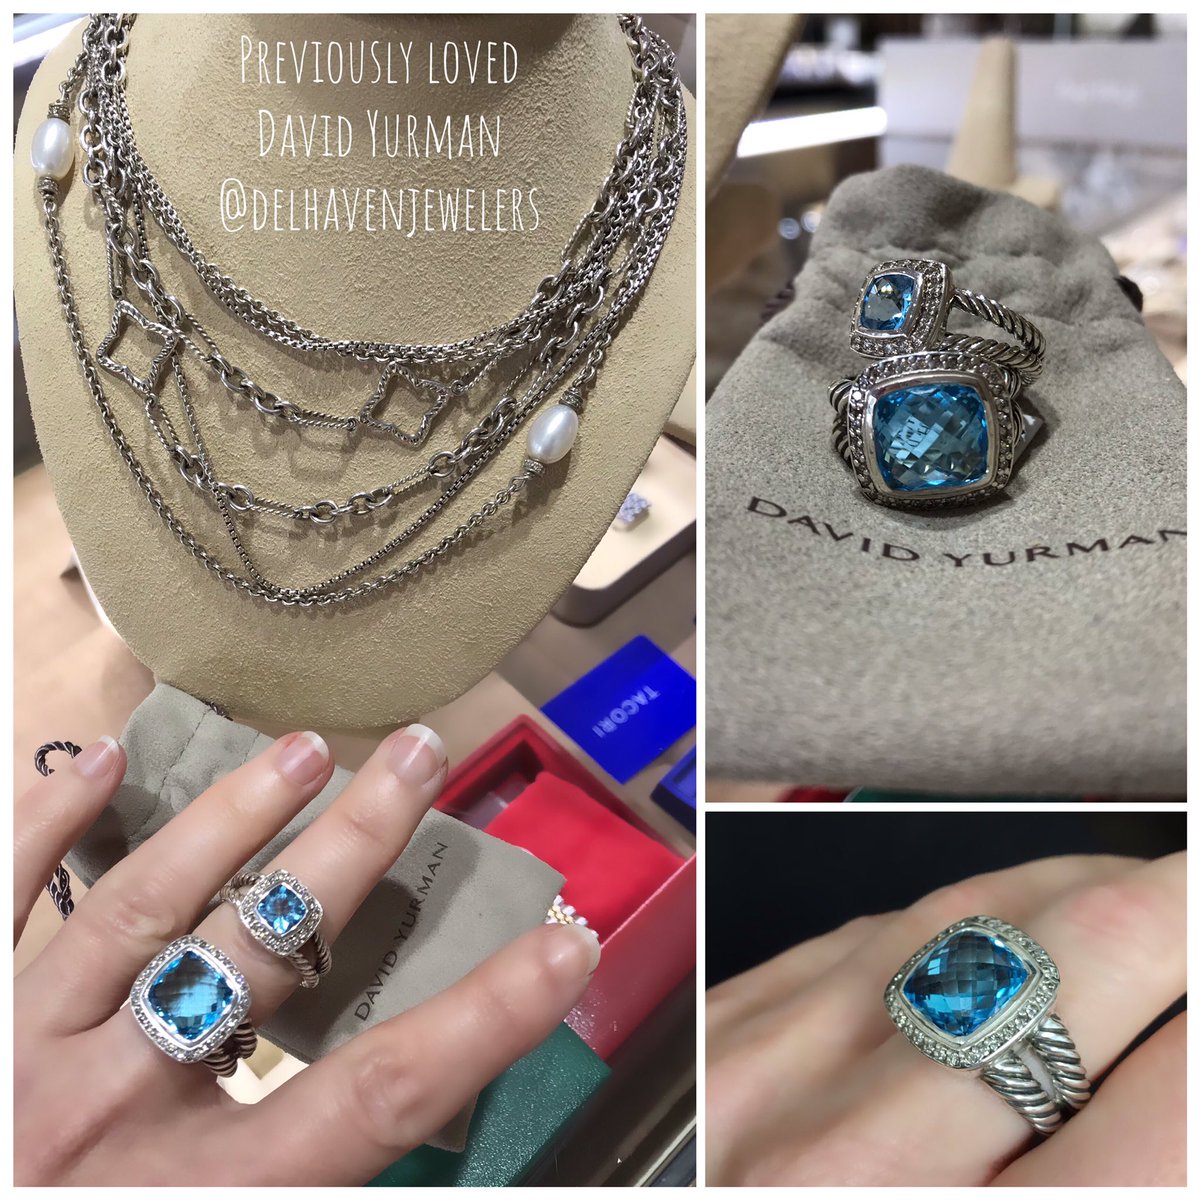 For all the David Yurman fans out there! New previously loved pieces have hit the case! Come see what’s new. #dy #davidyurman #bluetopaz #classiccable #sterlingsilver #previouslyloved #delhaven #peoplesplazade #peoplesplazashops #delawarejeweler #localjeweler